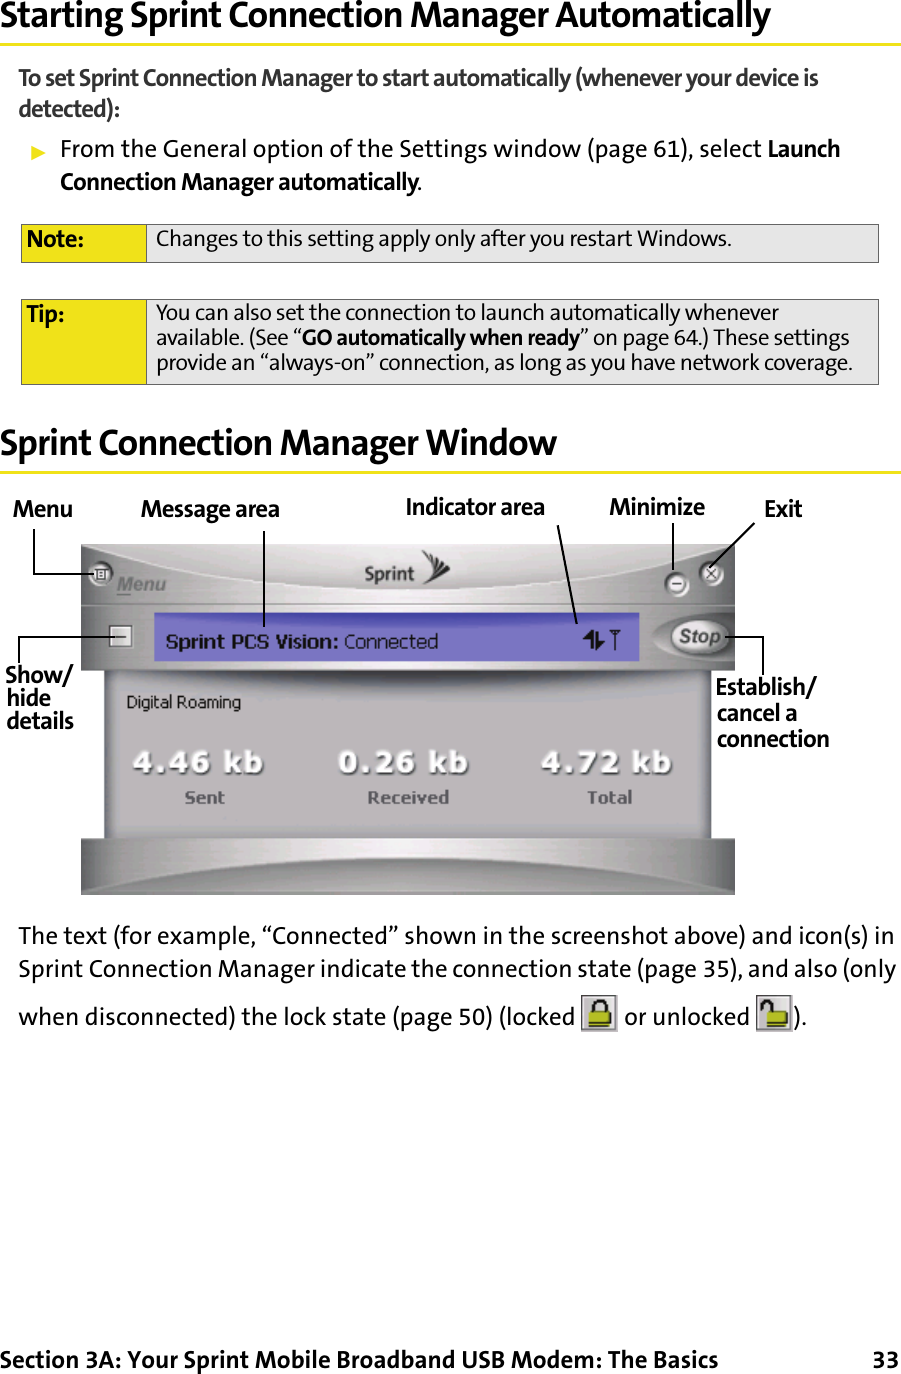 Section 3A: Your Sprint Mobile Broadband USB Modem: The Basics      33Starting Sprint Connection Manager AutomaticallyTo set Sprint Connection Manager to start automatically (whenever your device is detected):䊳From the General option of the Settings window (page 61), select Launch Connection Manager automatically.Sprint Connection Manager WindowThe text (for example, “Connected” shown in the screenshot above) and icon(s) in Sprint Connection Manager indicate the connection state (page 35), and also (only when disconnected) the lock state (page 50) (locked   or unlocked  ).Note: Changes to this setting apply only after you restart Windows.Tip: You can also set the connection to launch automatically whenever available. (See “GO automatically when ready” on page 64.) These settings provide an “always-on” connection, as long as you have network coverage.ExitEstablish/Show/Menuhidedetails cancel aMinimizeMessage area Indicator areaconnection